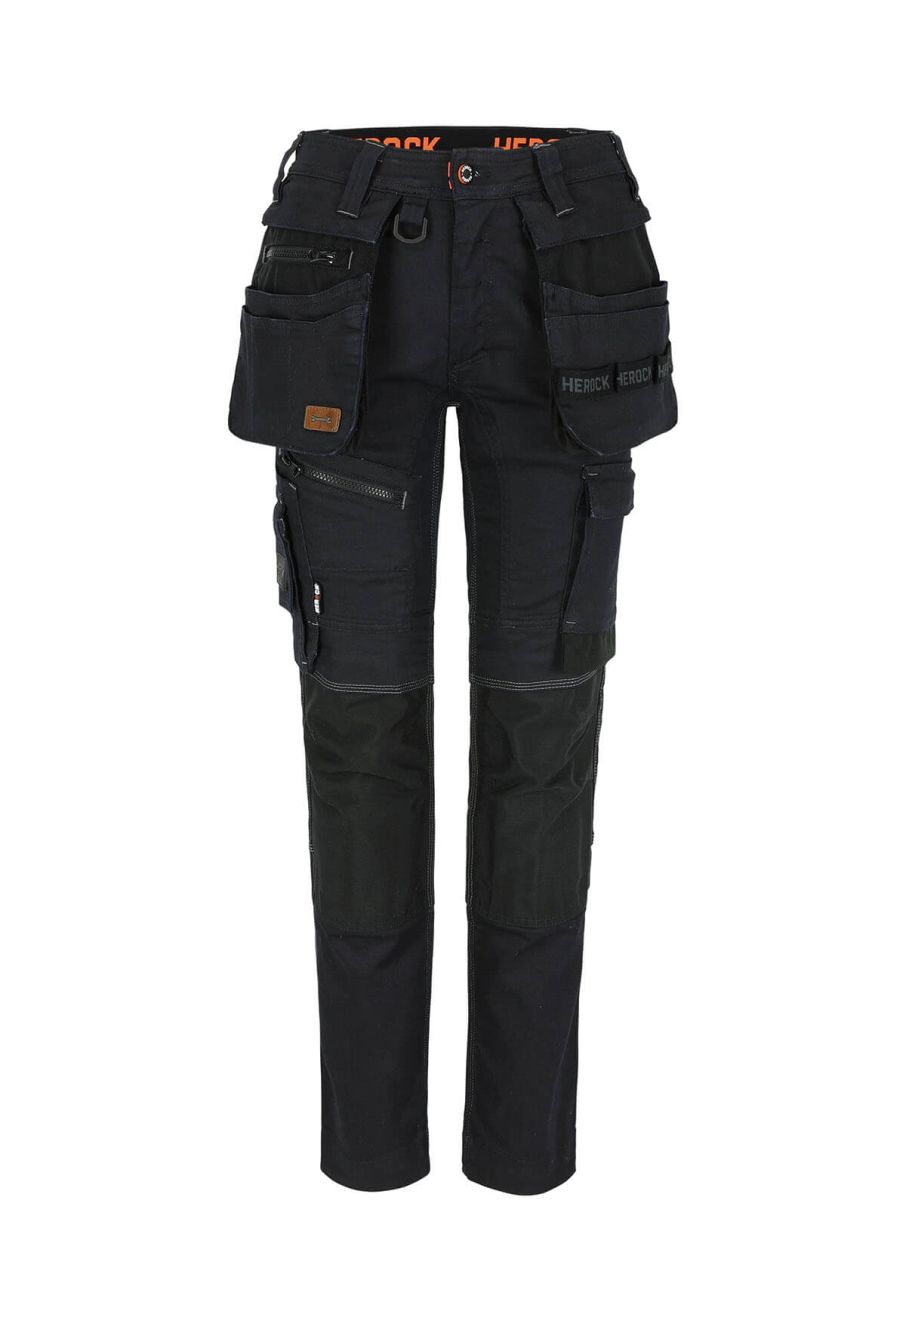 Blaklader Cordura Denim Stretch Work Trousers Jeans Knee & Holster Pockets-  1999 Trousers Active-Workwear